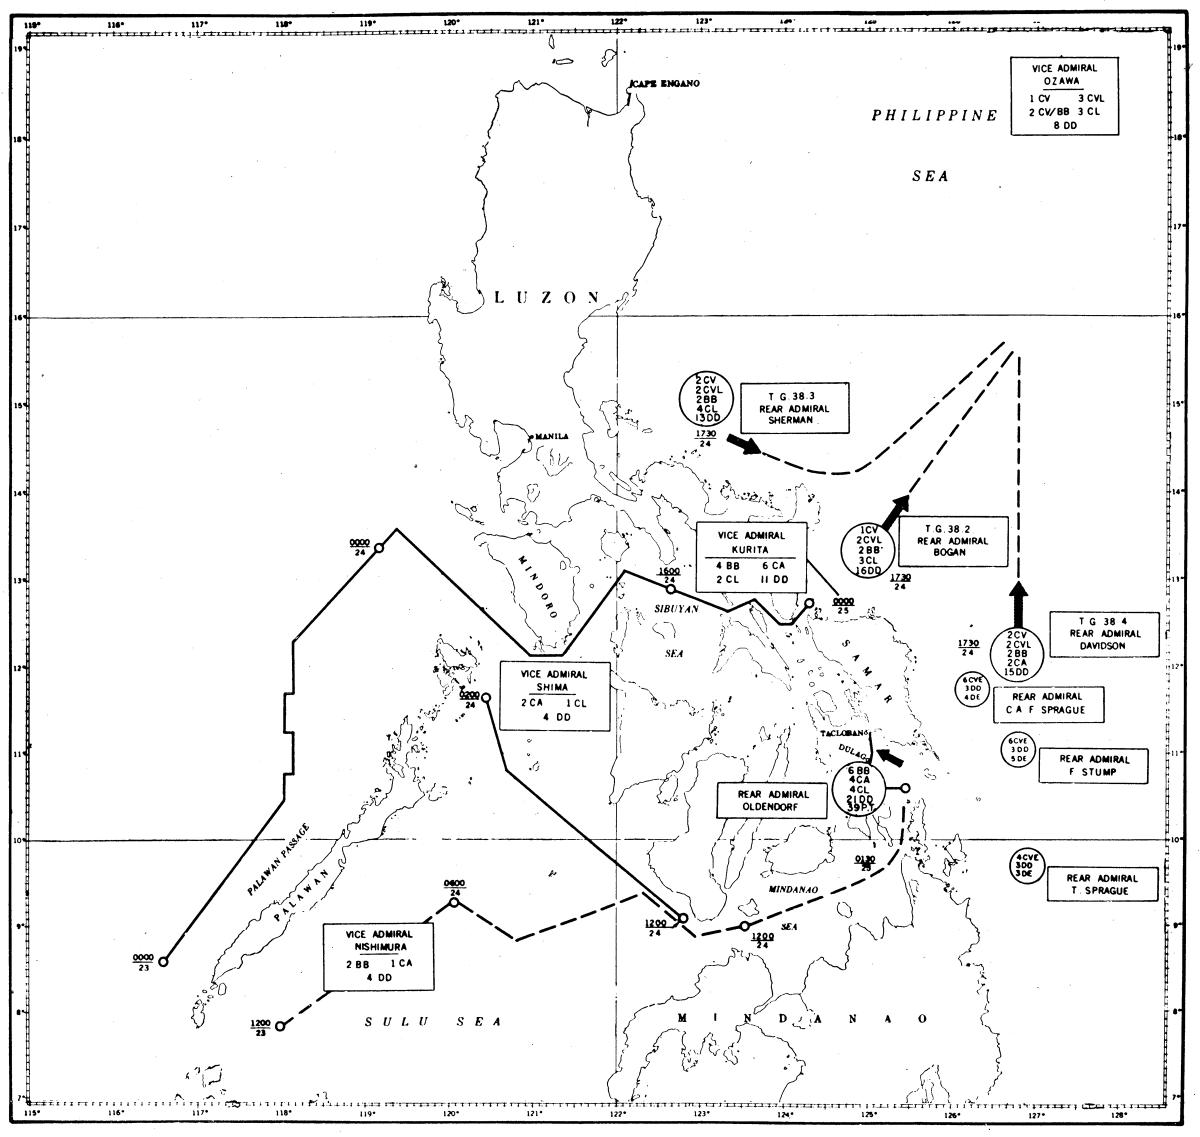 Map of the Battle of Leyte Gulf